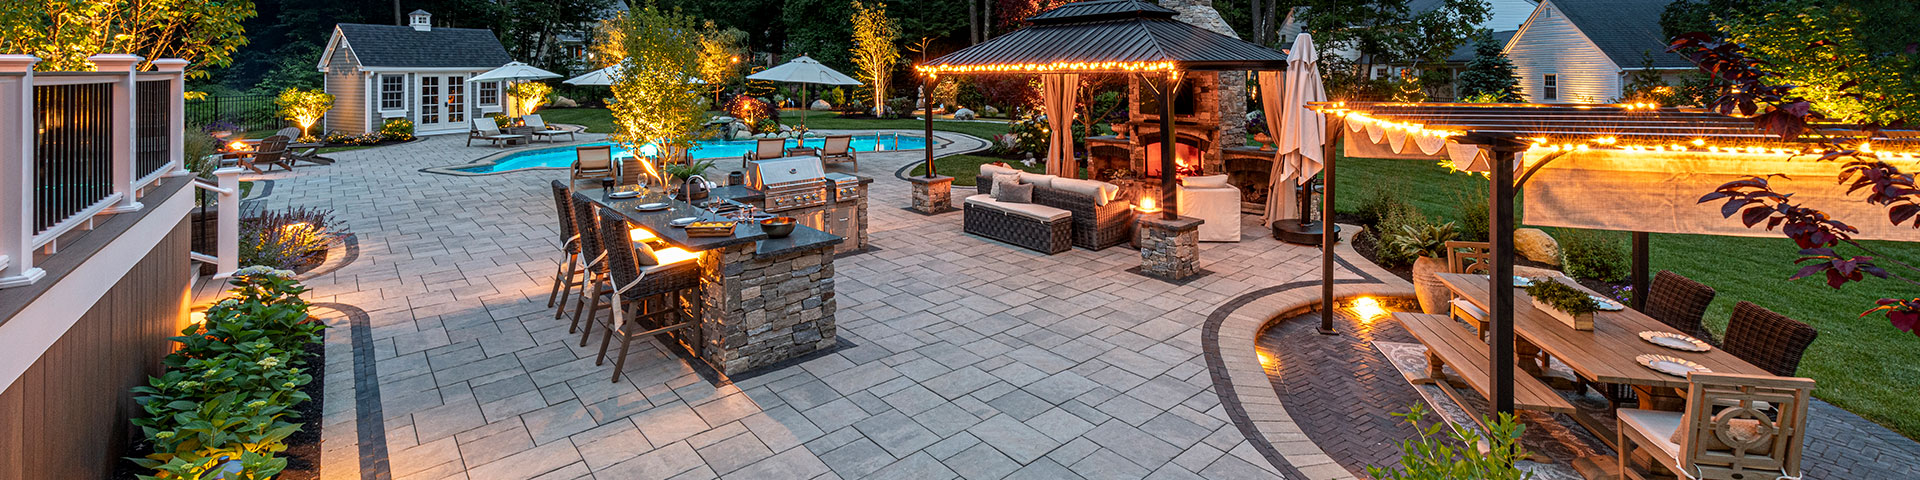 Unilock Outdoor Living Space with a Pool and Fireplace and Kitchen Island